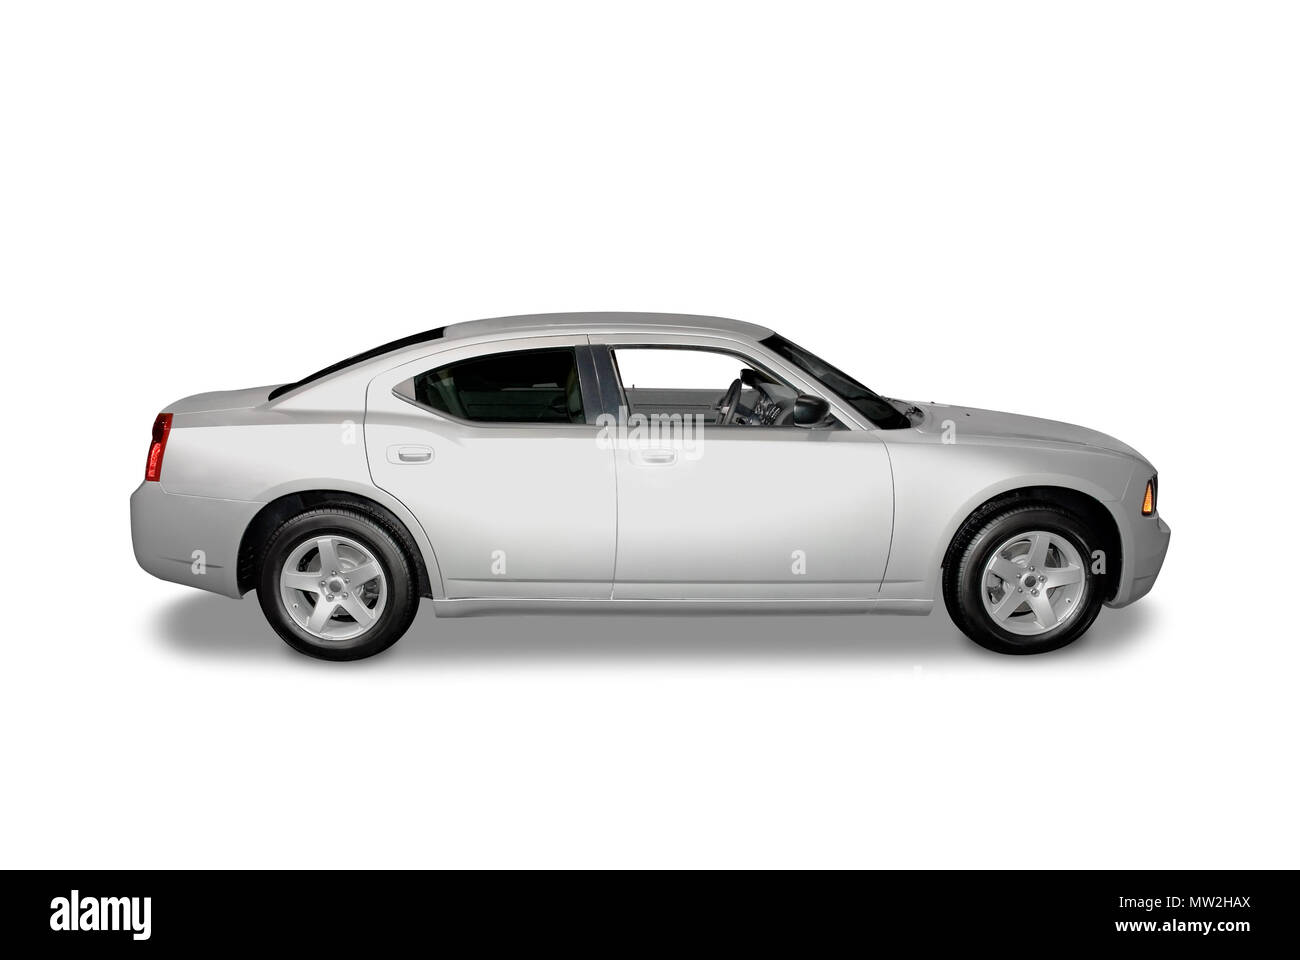 New silver colored  retro style car. The design is inspired by the old American muscle cars of the past. Isolated on a white background with a shadow  Stock Photo